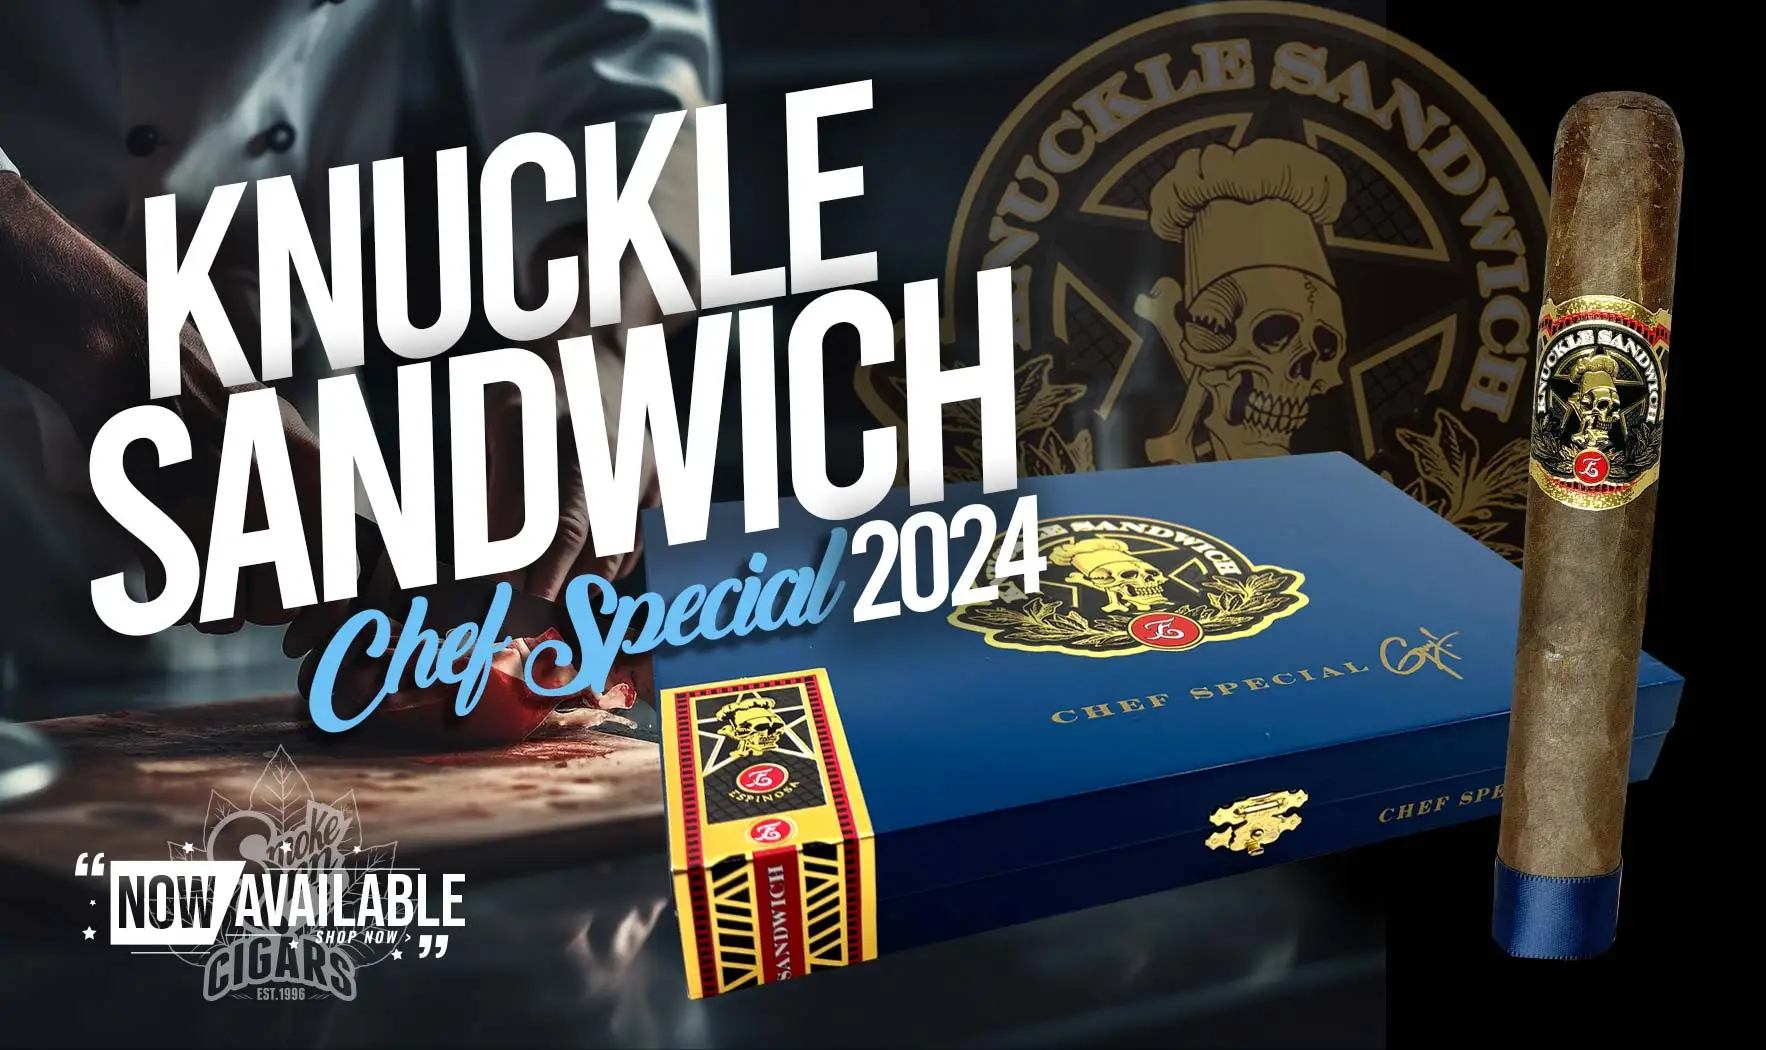 Espinosa Knuckle Sandwich Chef Special 2024